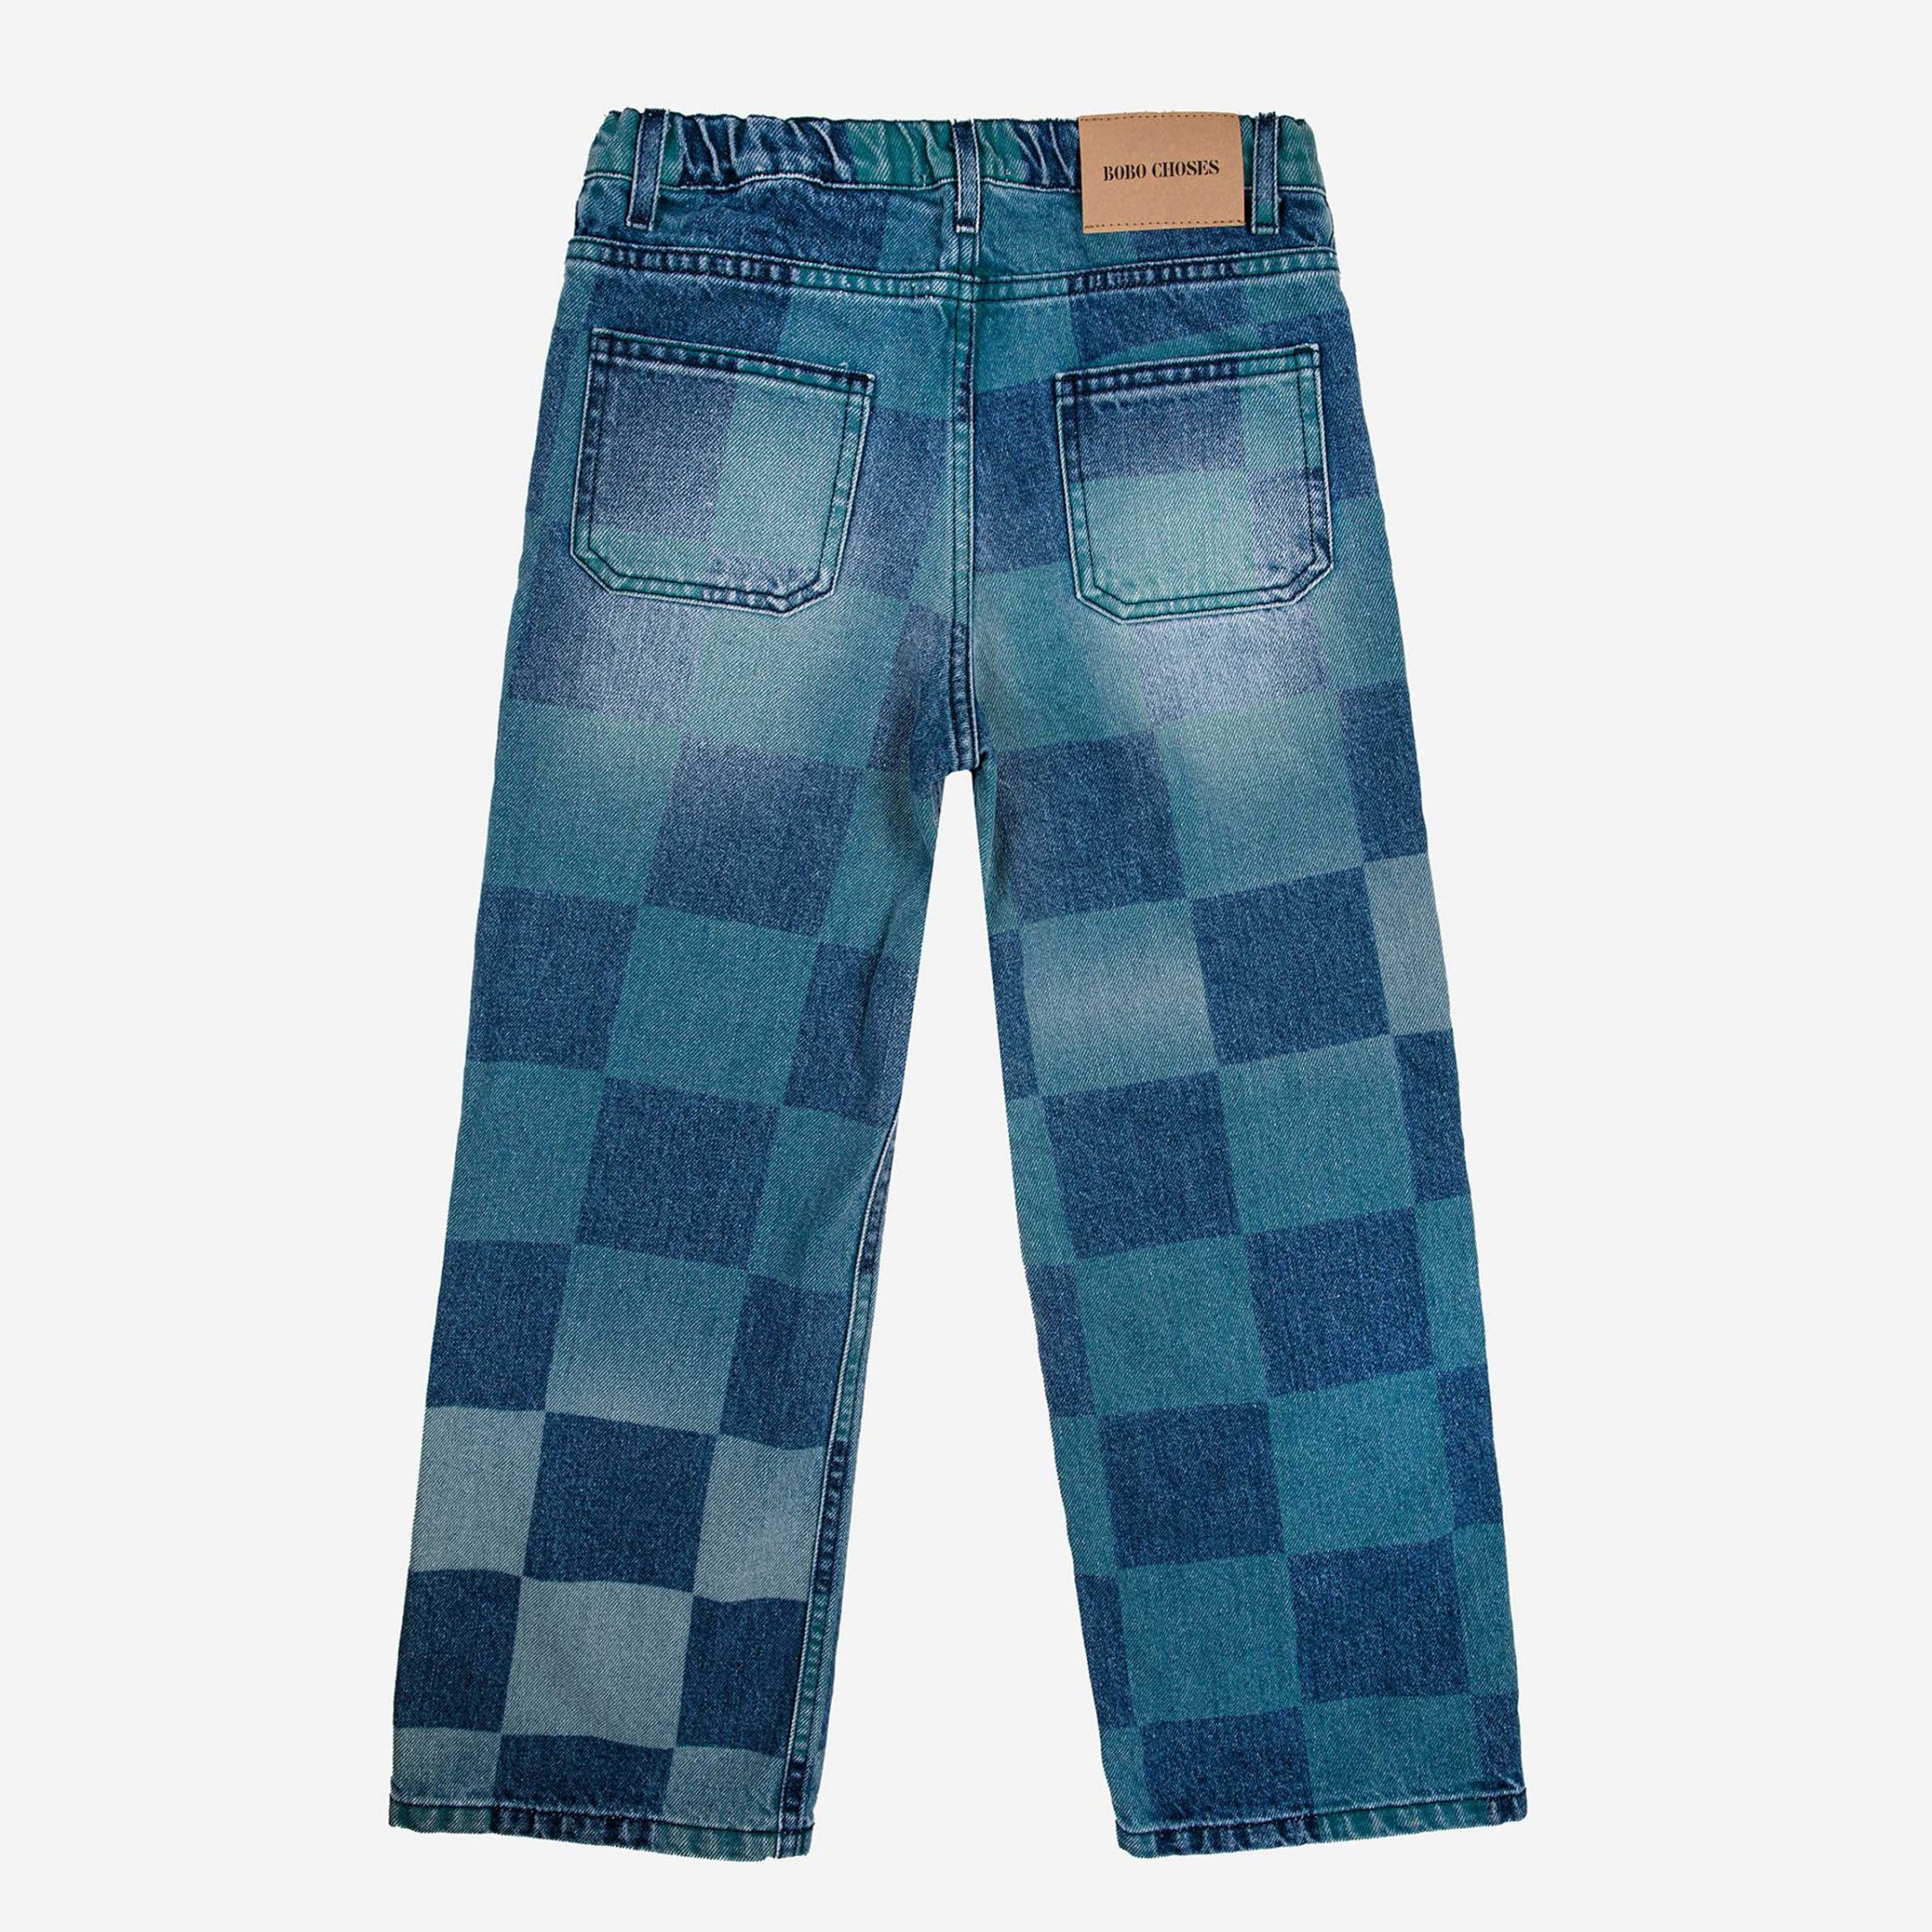 Vintage Checkered High Waist Denim Plaid Pants Women For Women Plaid Style  With Wide Leg And Boyfriend Style Cotton Blend Straight Fit Style 201223  From Lu003, $32.52 | DHgate.Com